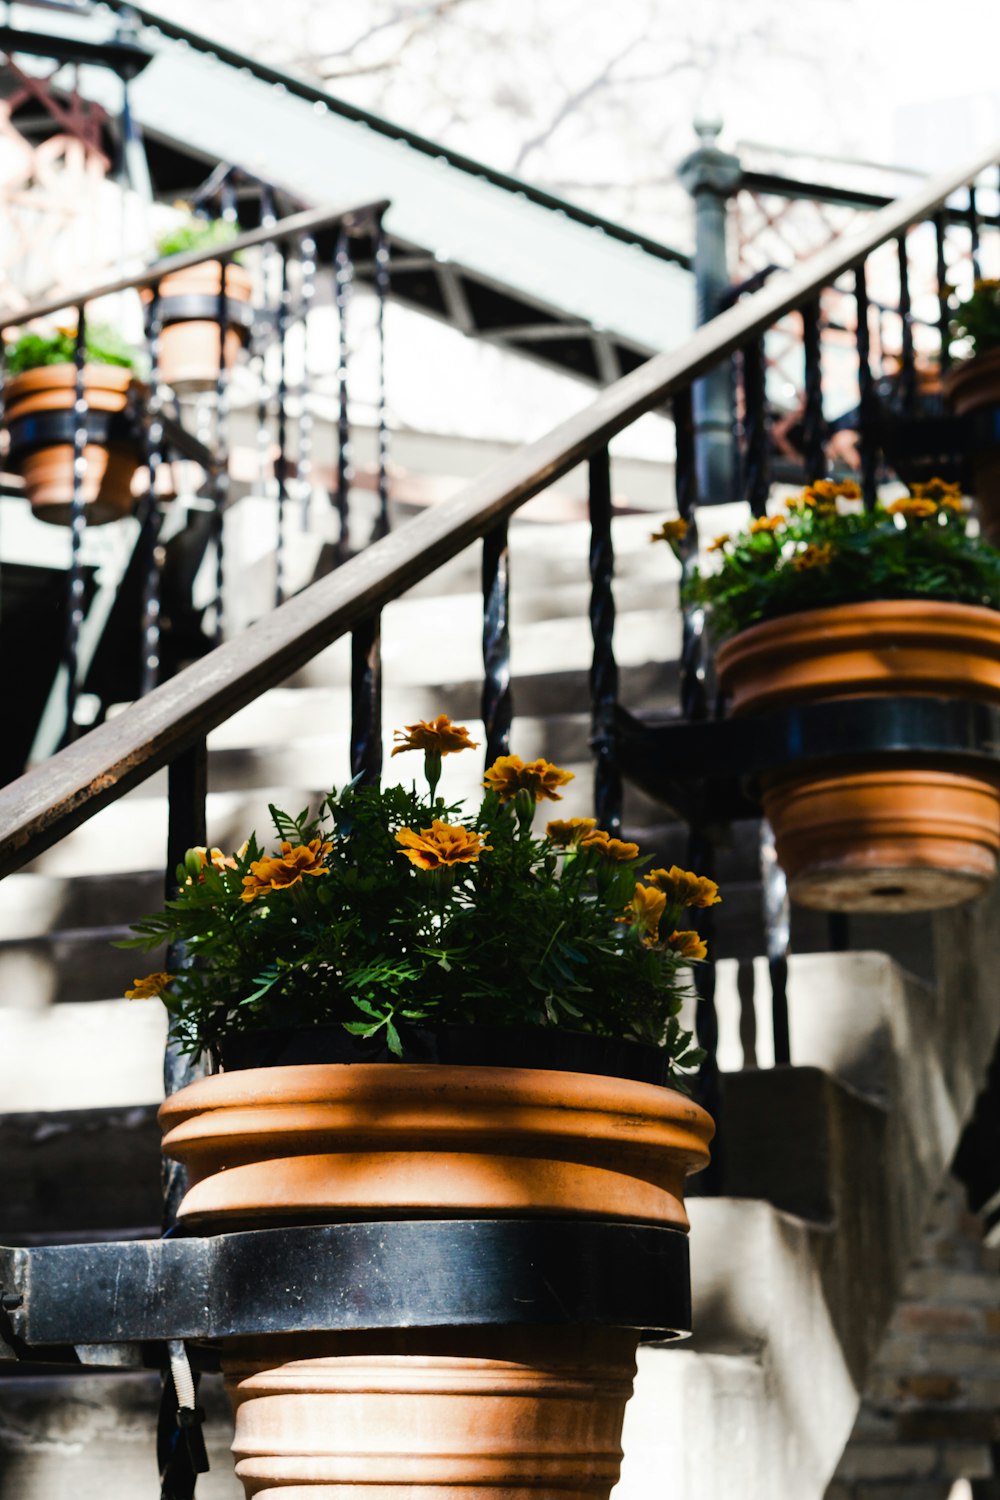 yellow flowers on brown pot hanging on stair handrails